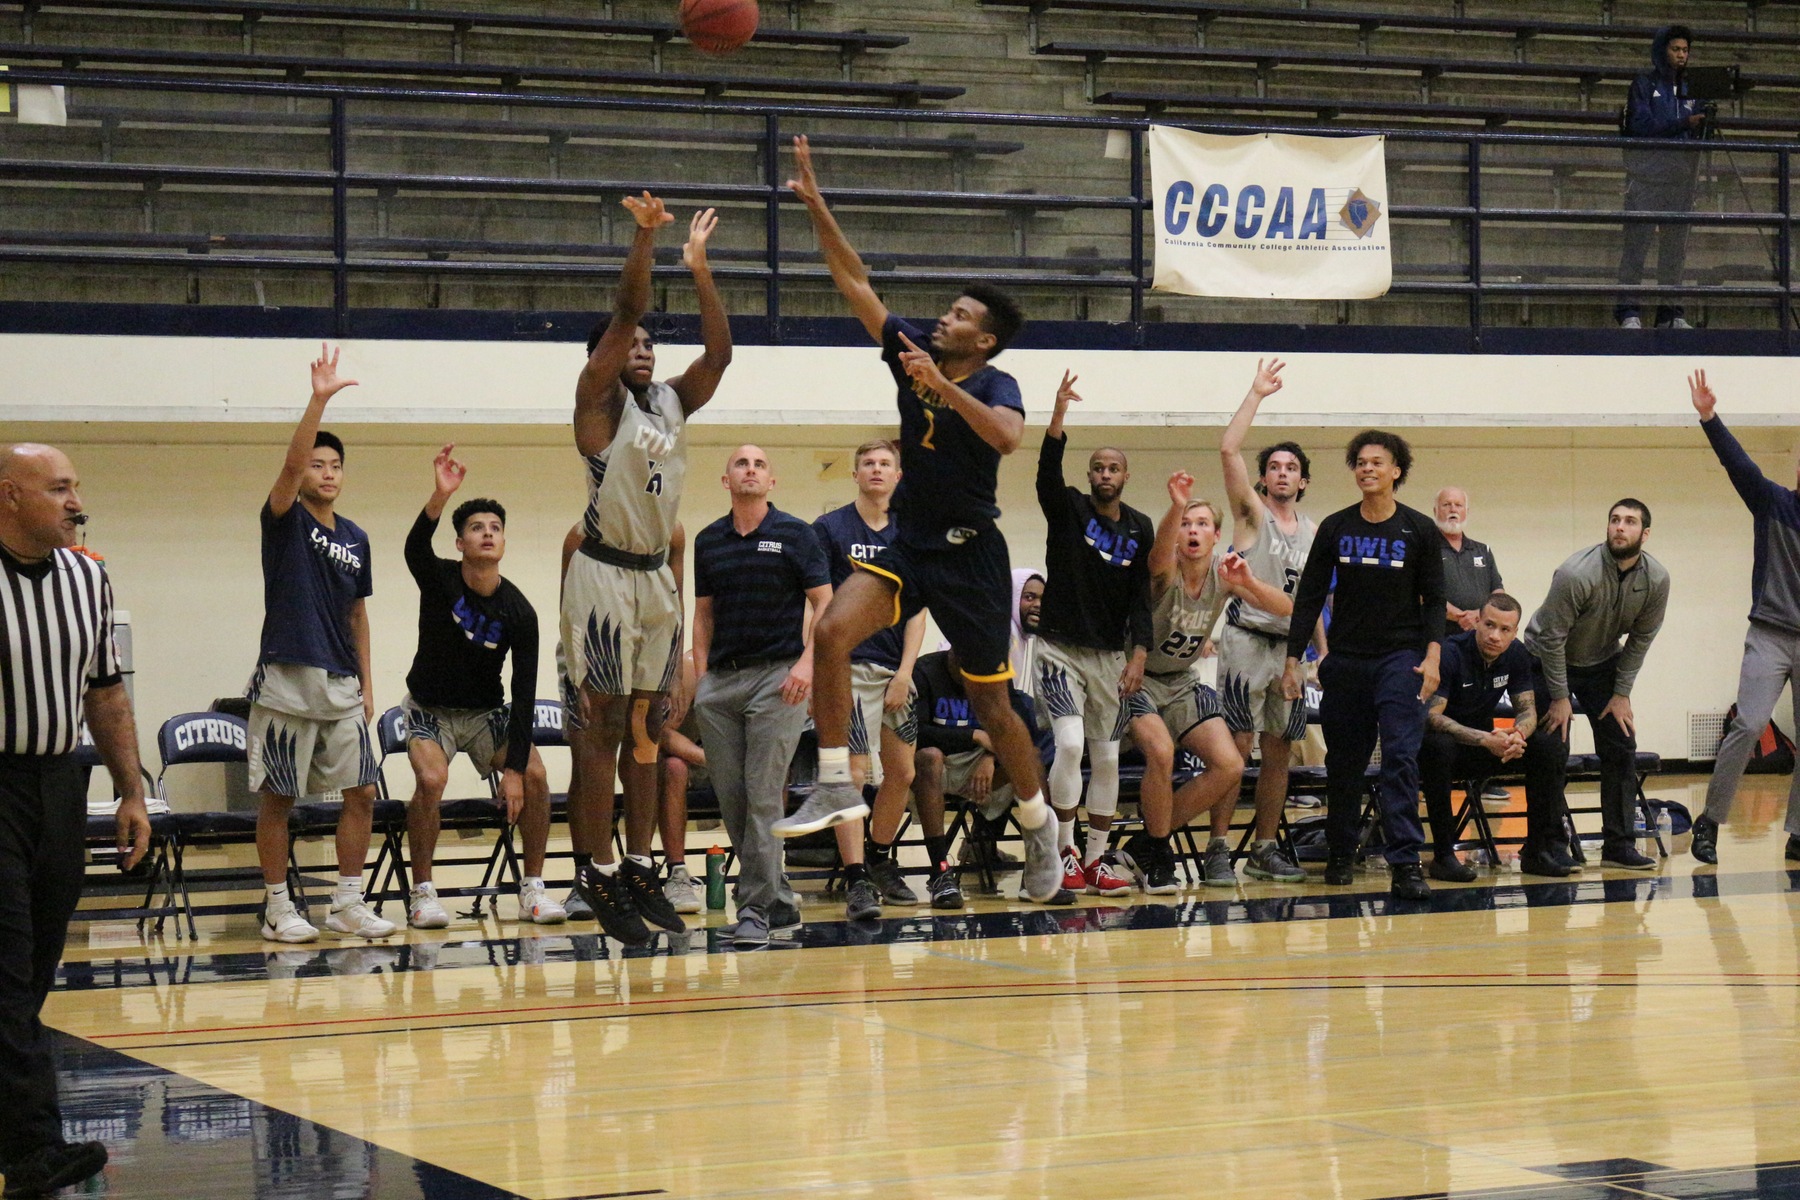 Psalm Maduakor lights up a three pointer, much to the pleasure of his teammates. Image: Andrew Wheeler